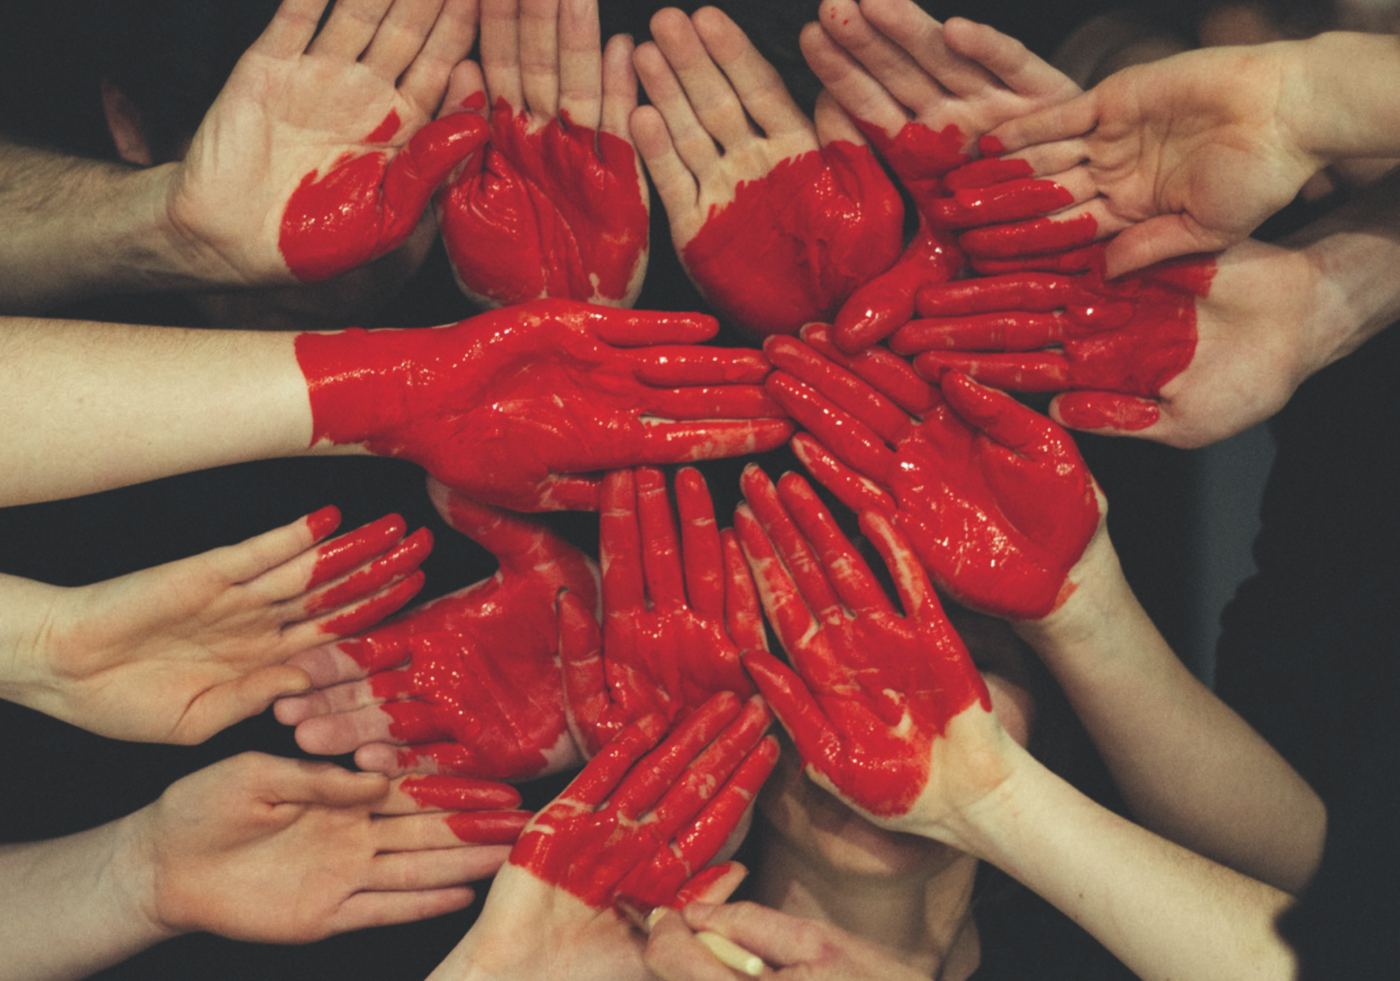 Several red painted hands together form a heart.